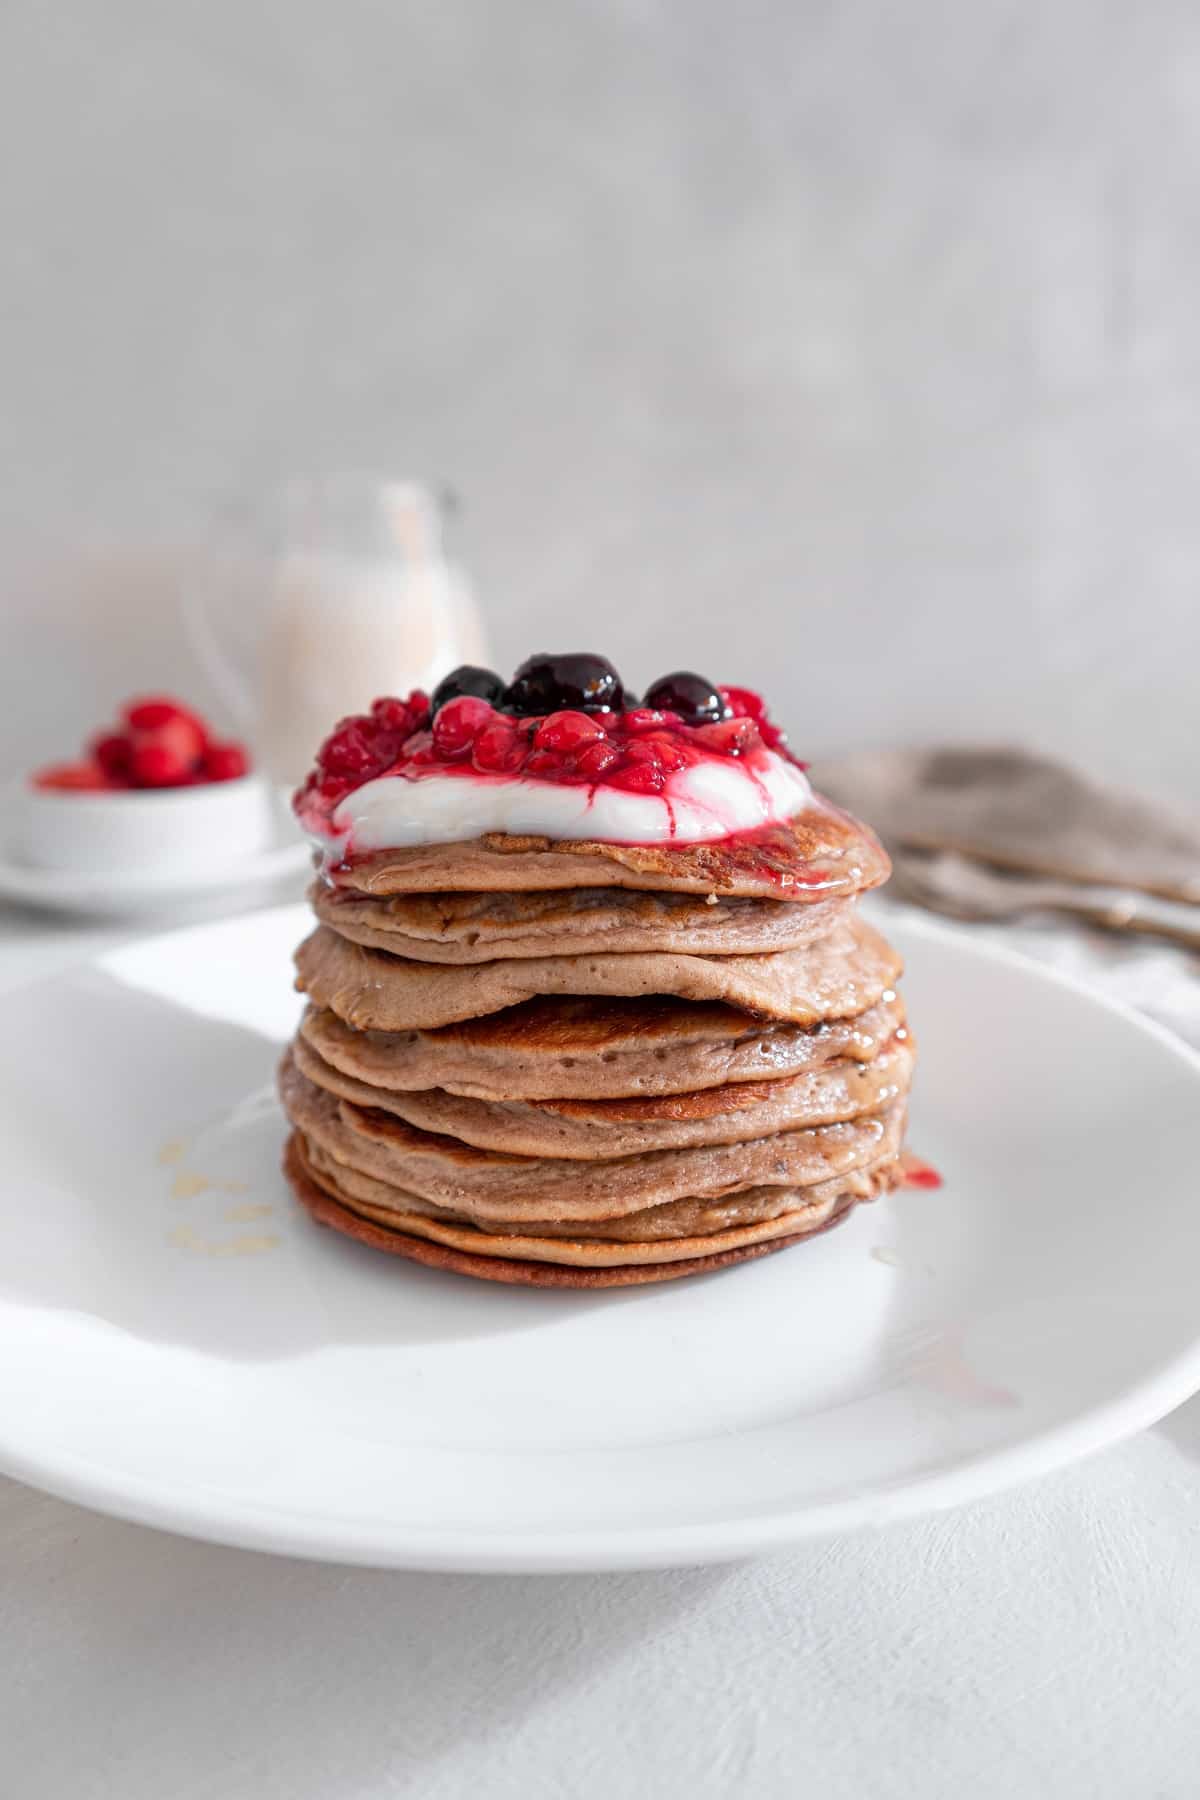 Chestnut flour pancakes with coconut yogurt and berries on top